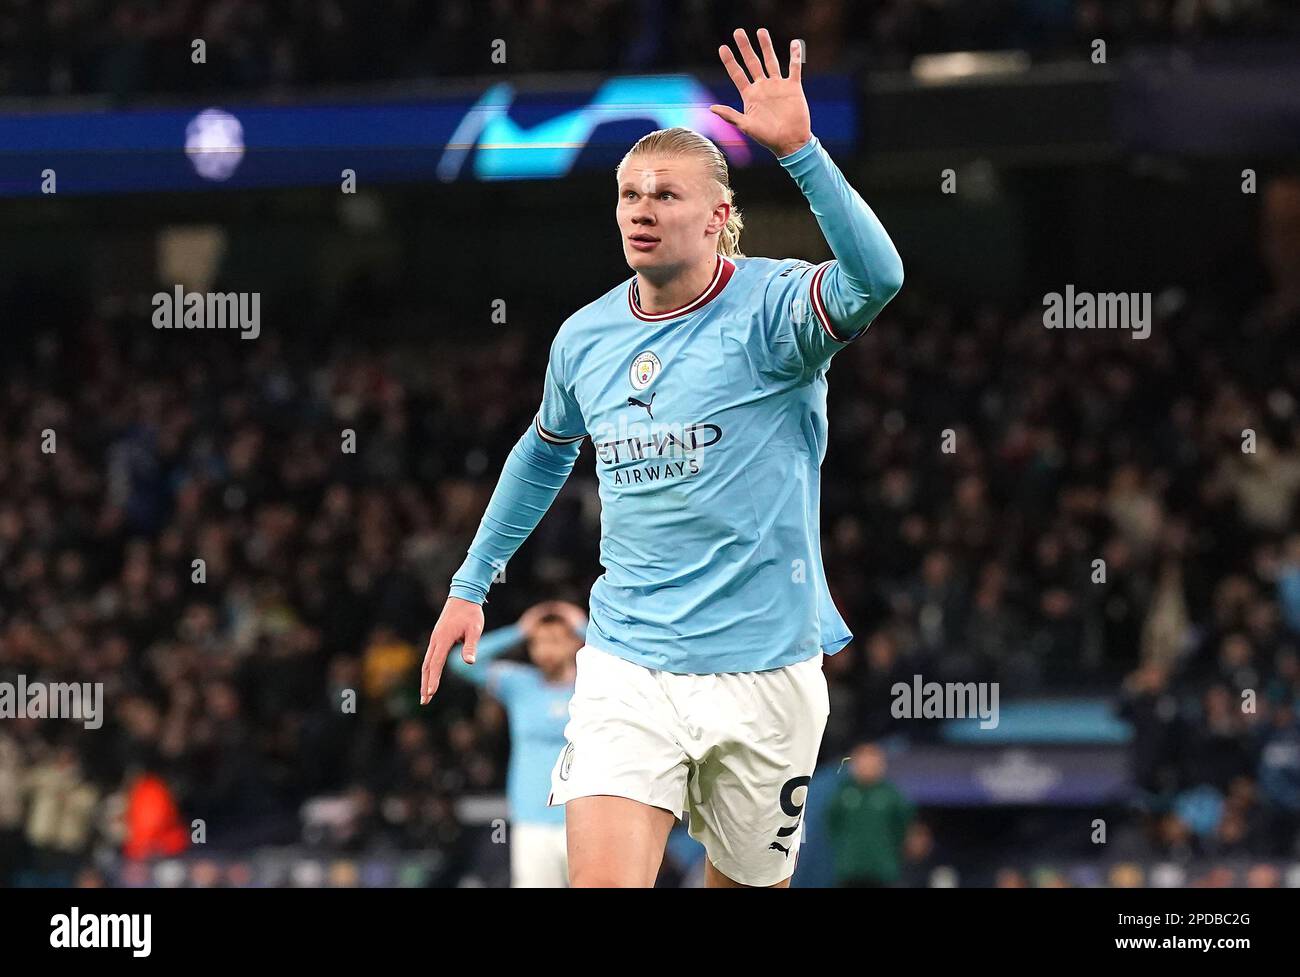 Champions League: Erling Haaland scores a double as Manchester